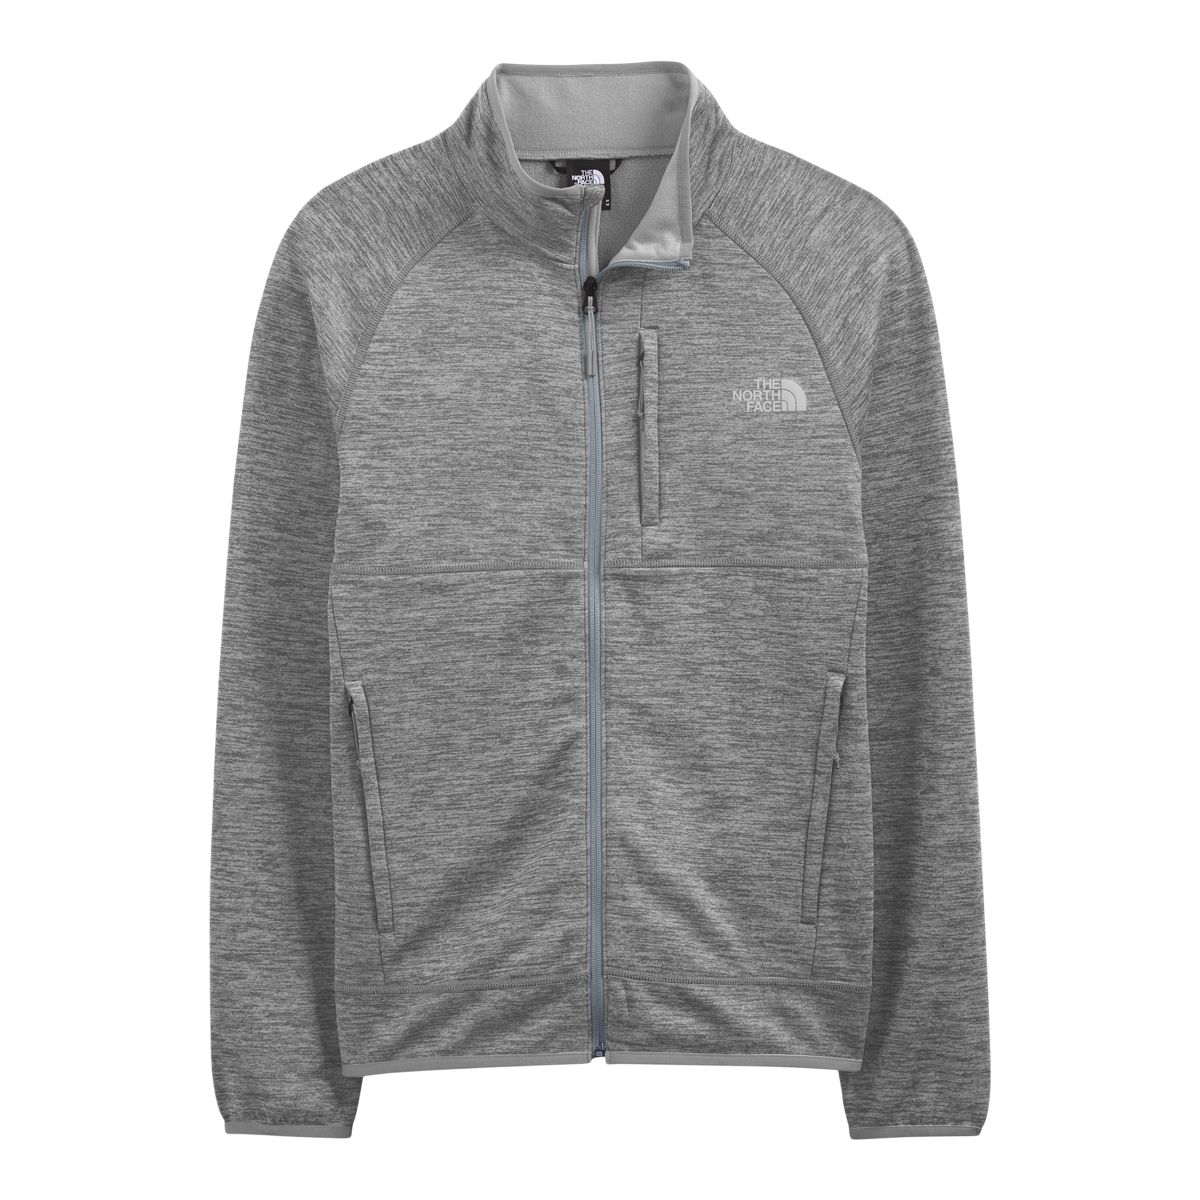 The North Face Men's Canyonlands Full Zip, Alpine Country Lodge